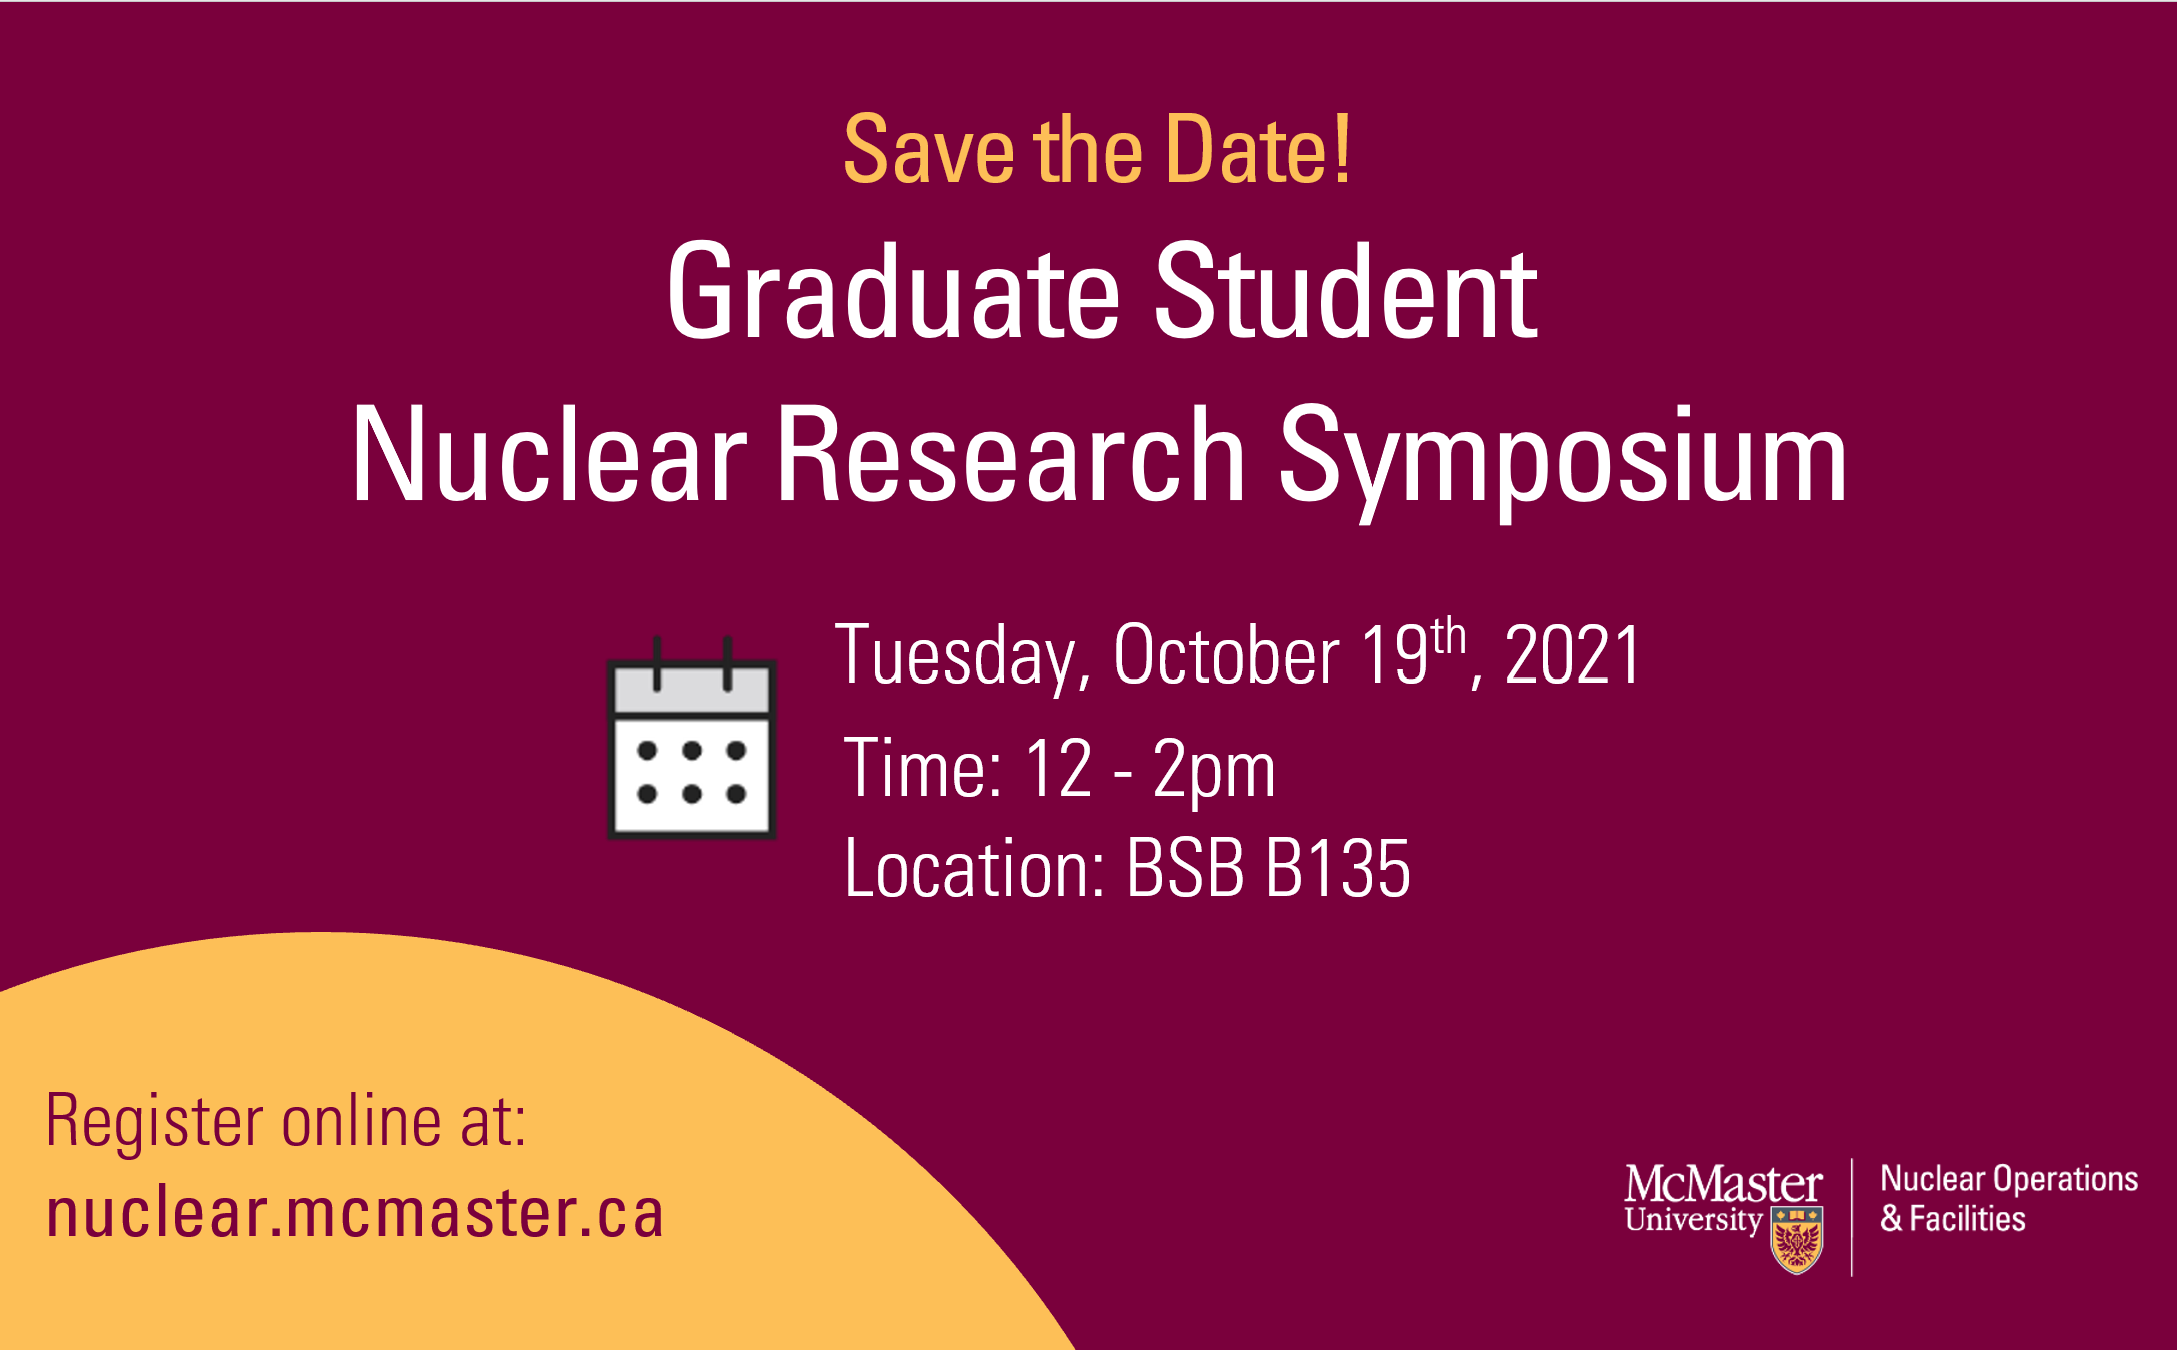 Graduate student nuclear research symposium. October 19th, 2021,12 to 2 pm. BSB B135.